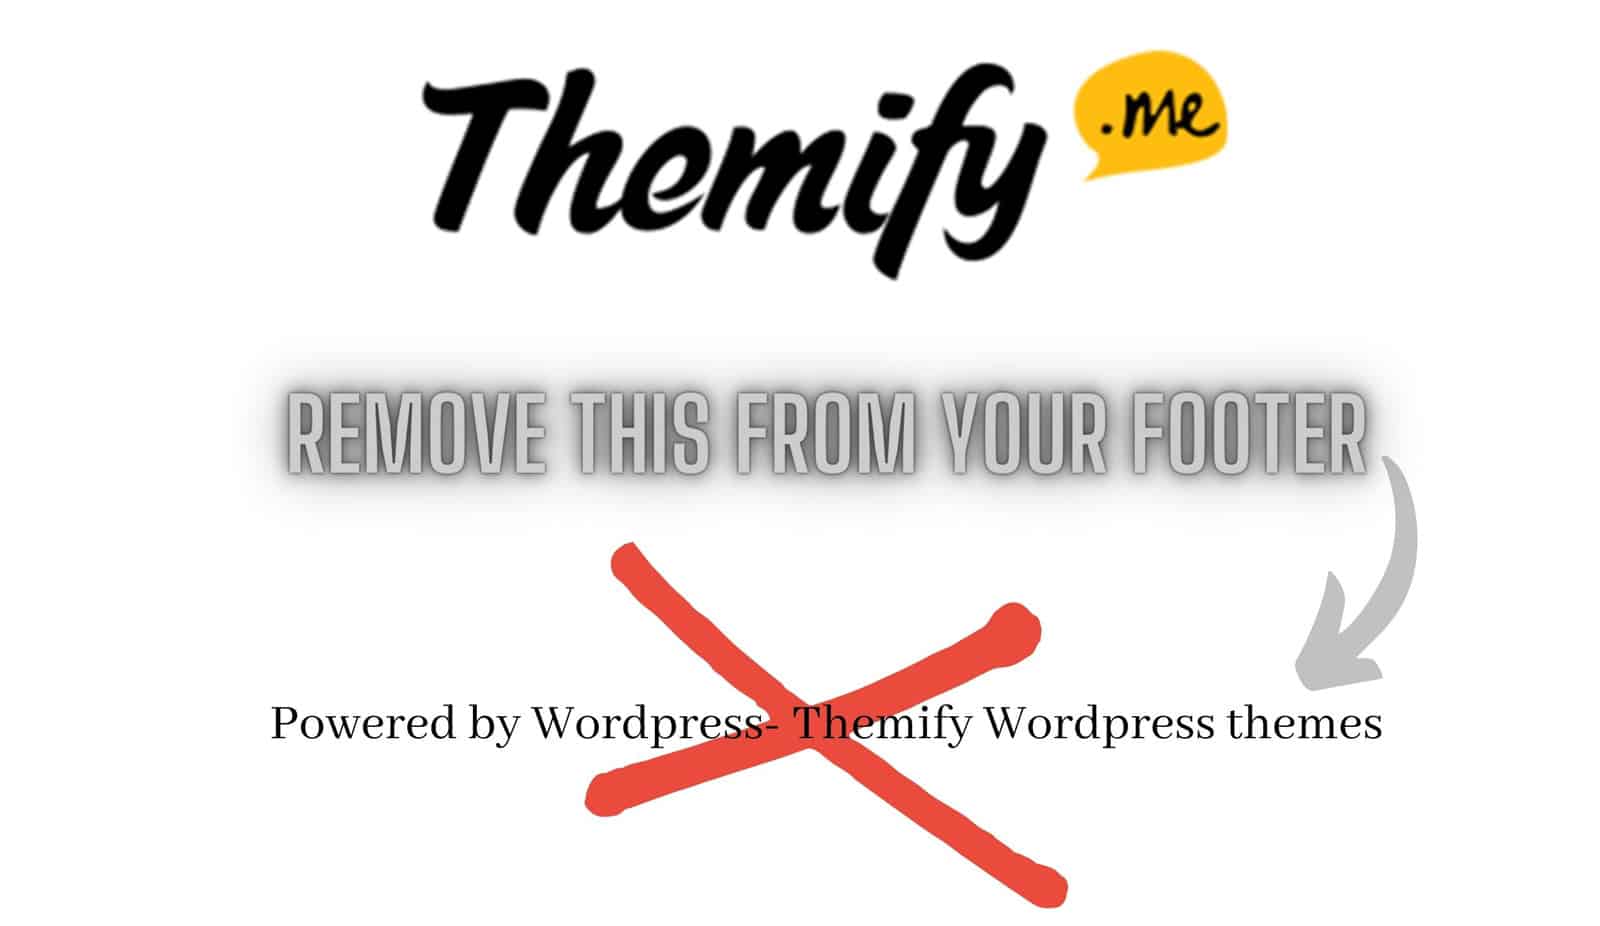 Themify Ultra and how to simply remove the “powered by WordPress” & “Themify WordPress themes” links & text from your footer.